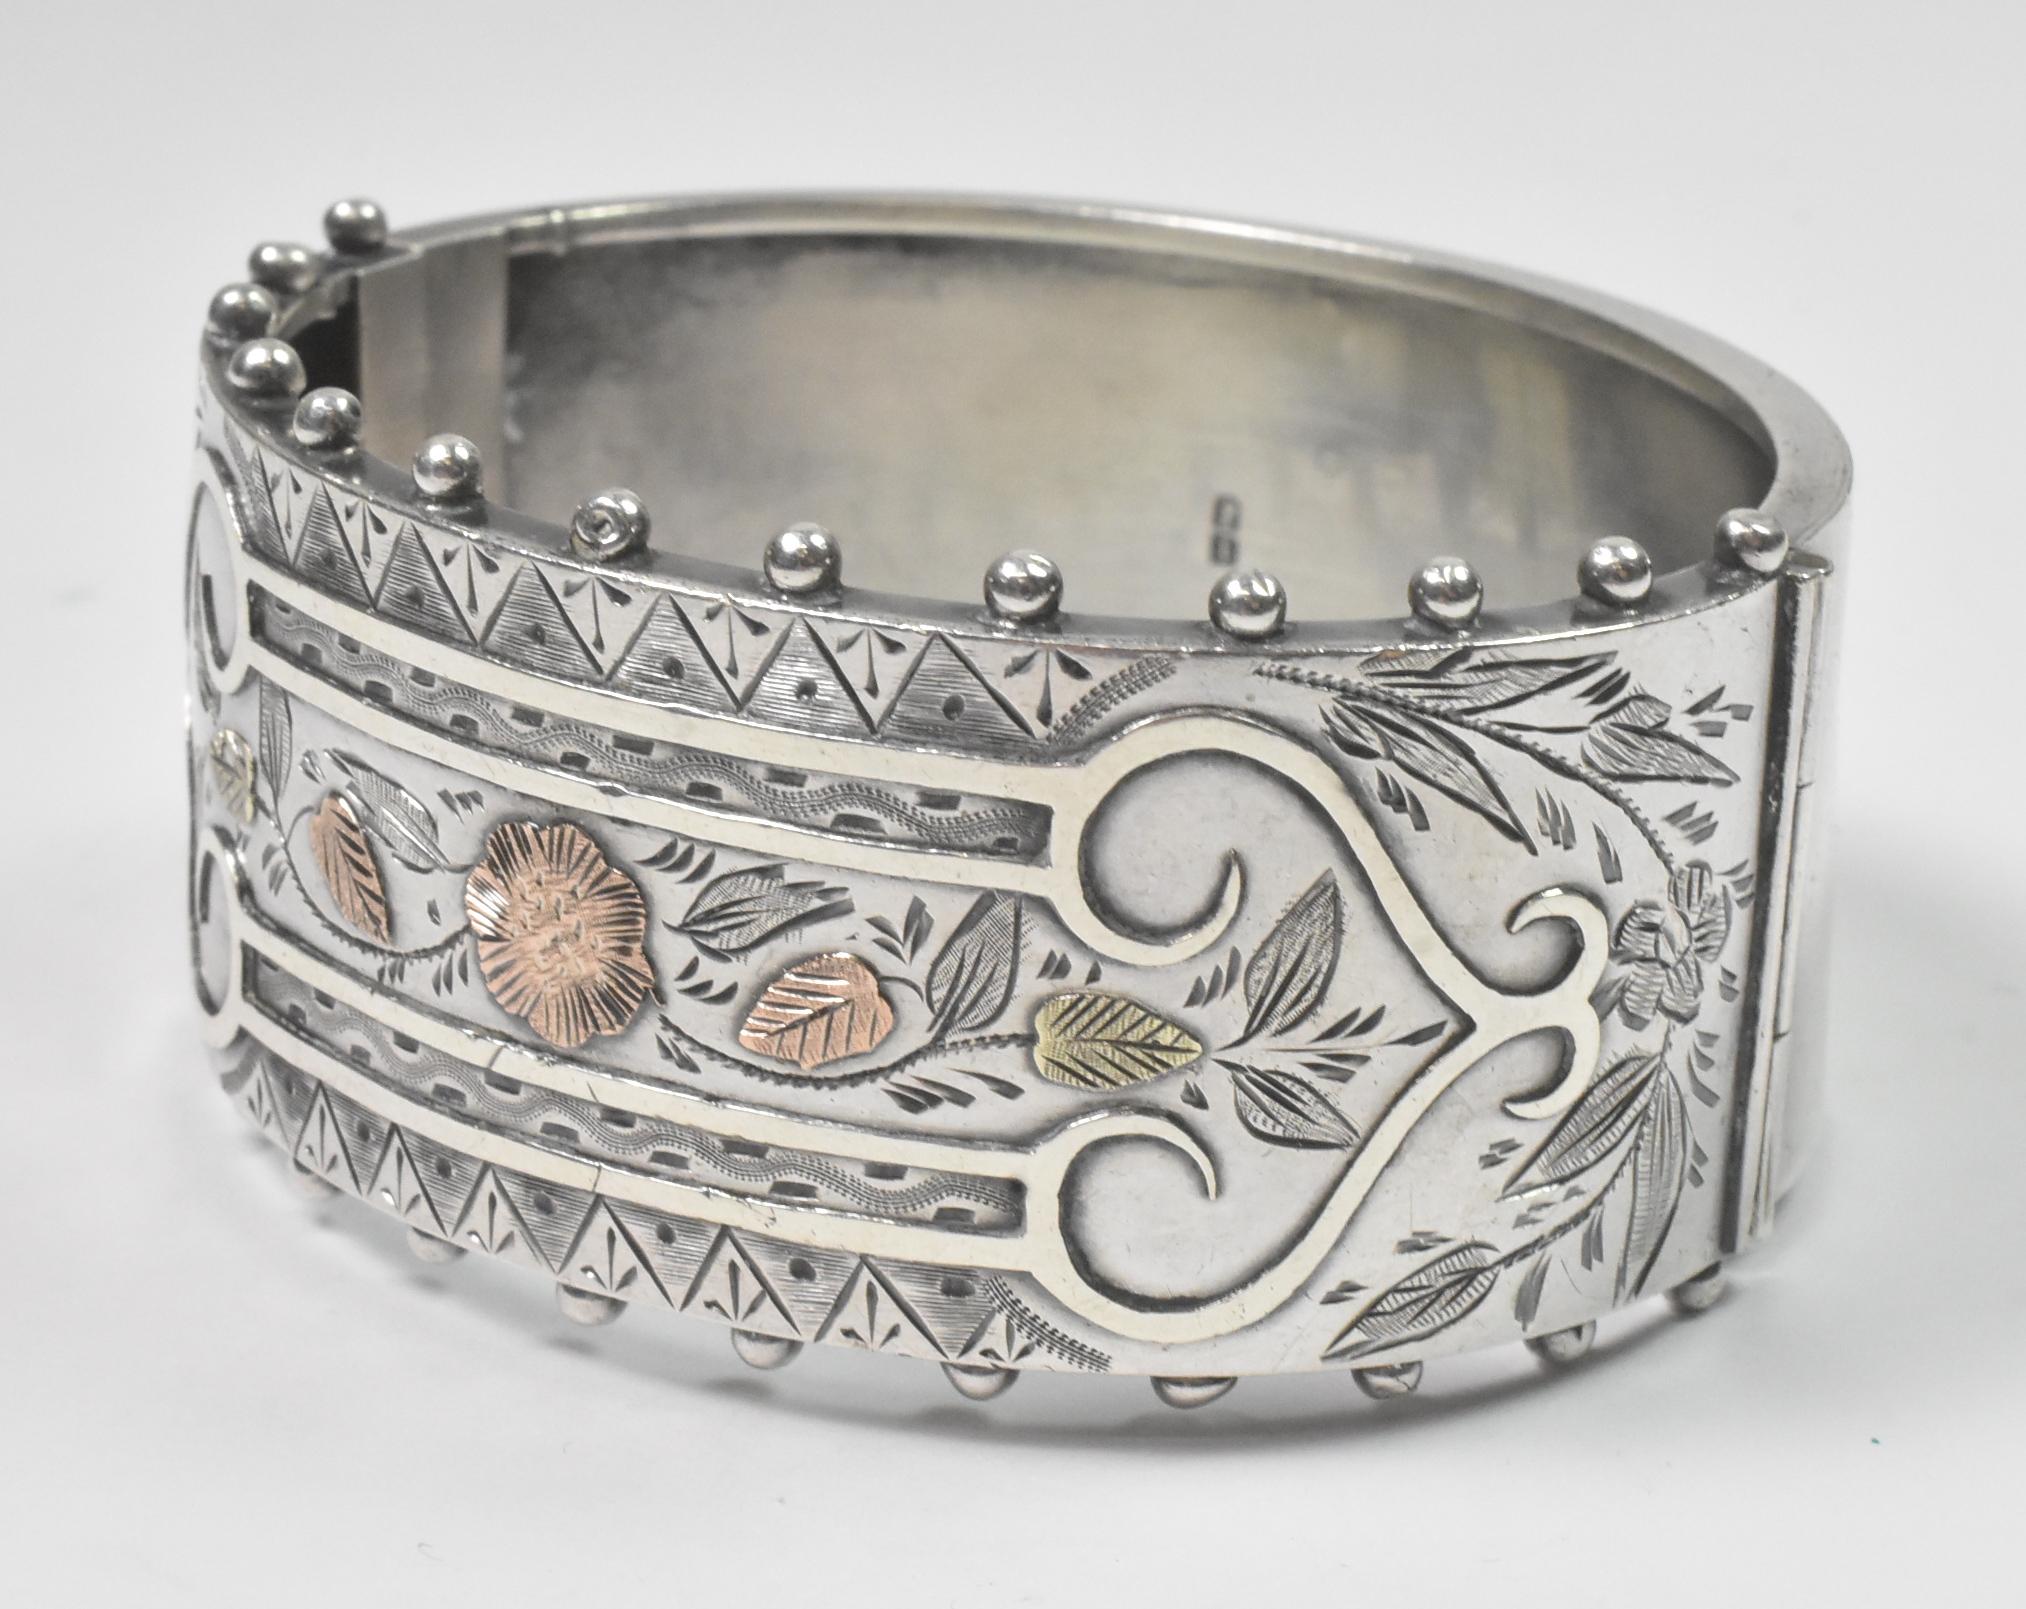 A. Brandt & Son Victorian sterling silver mixed metals bangle bracelet. Circa 1880's. Stamped inside with several English hallmarks. Inlaid rose gold of flowers and leaves. Inscription on back as photo'd. Good condition with a small dent near the